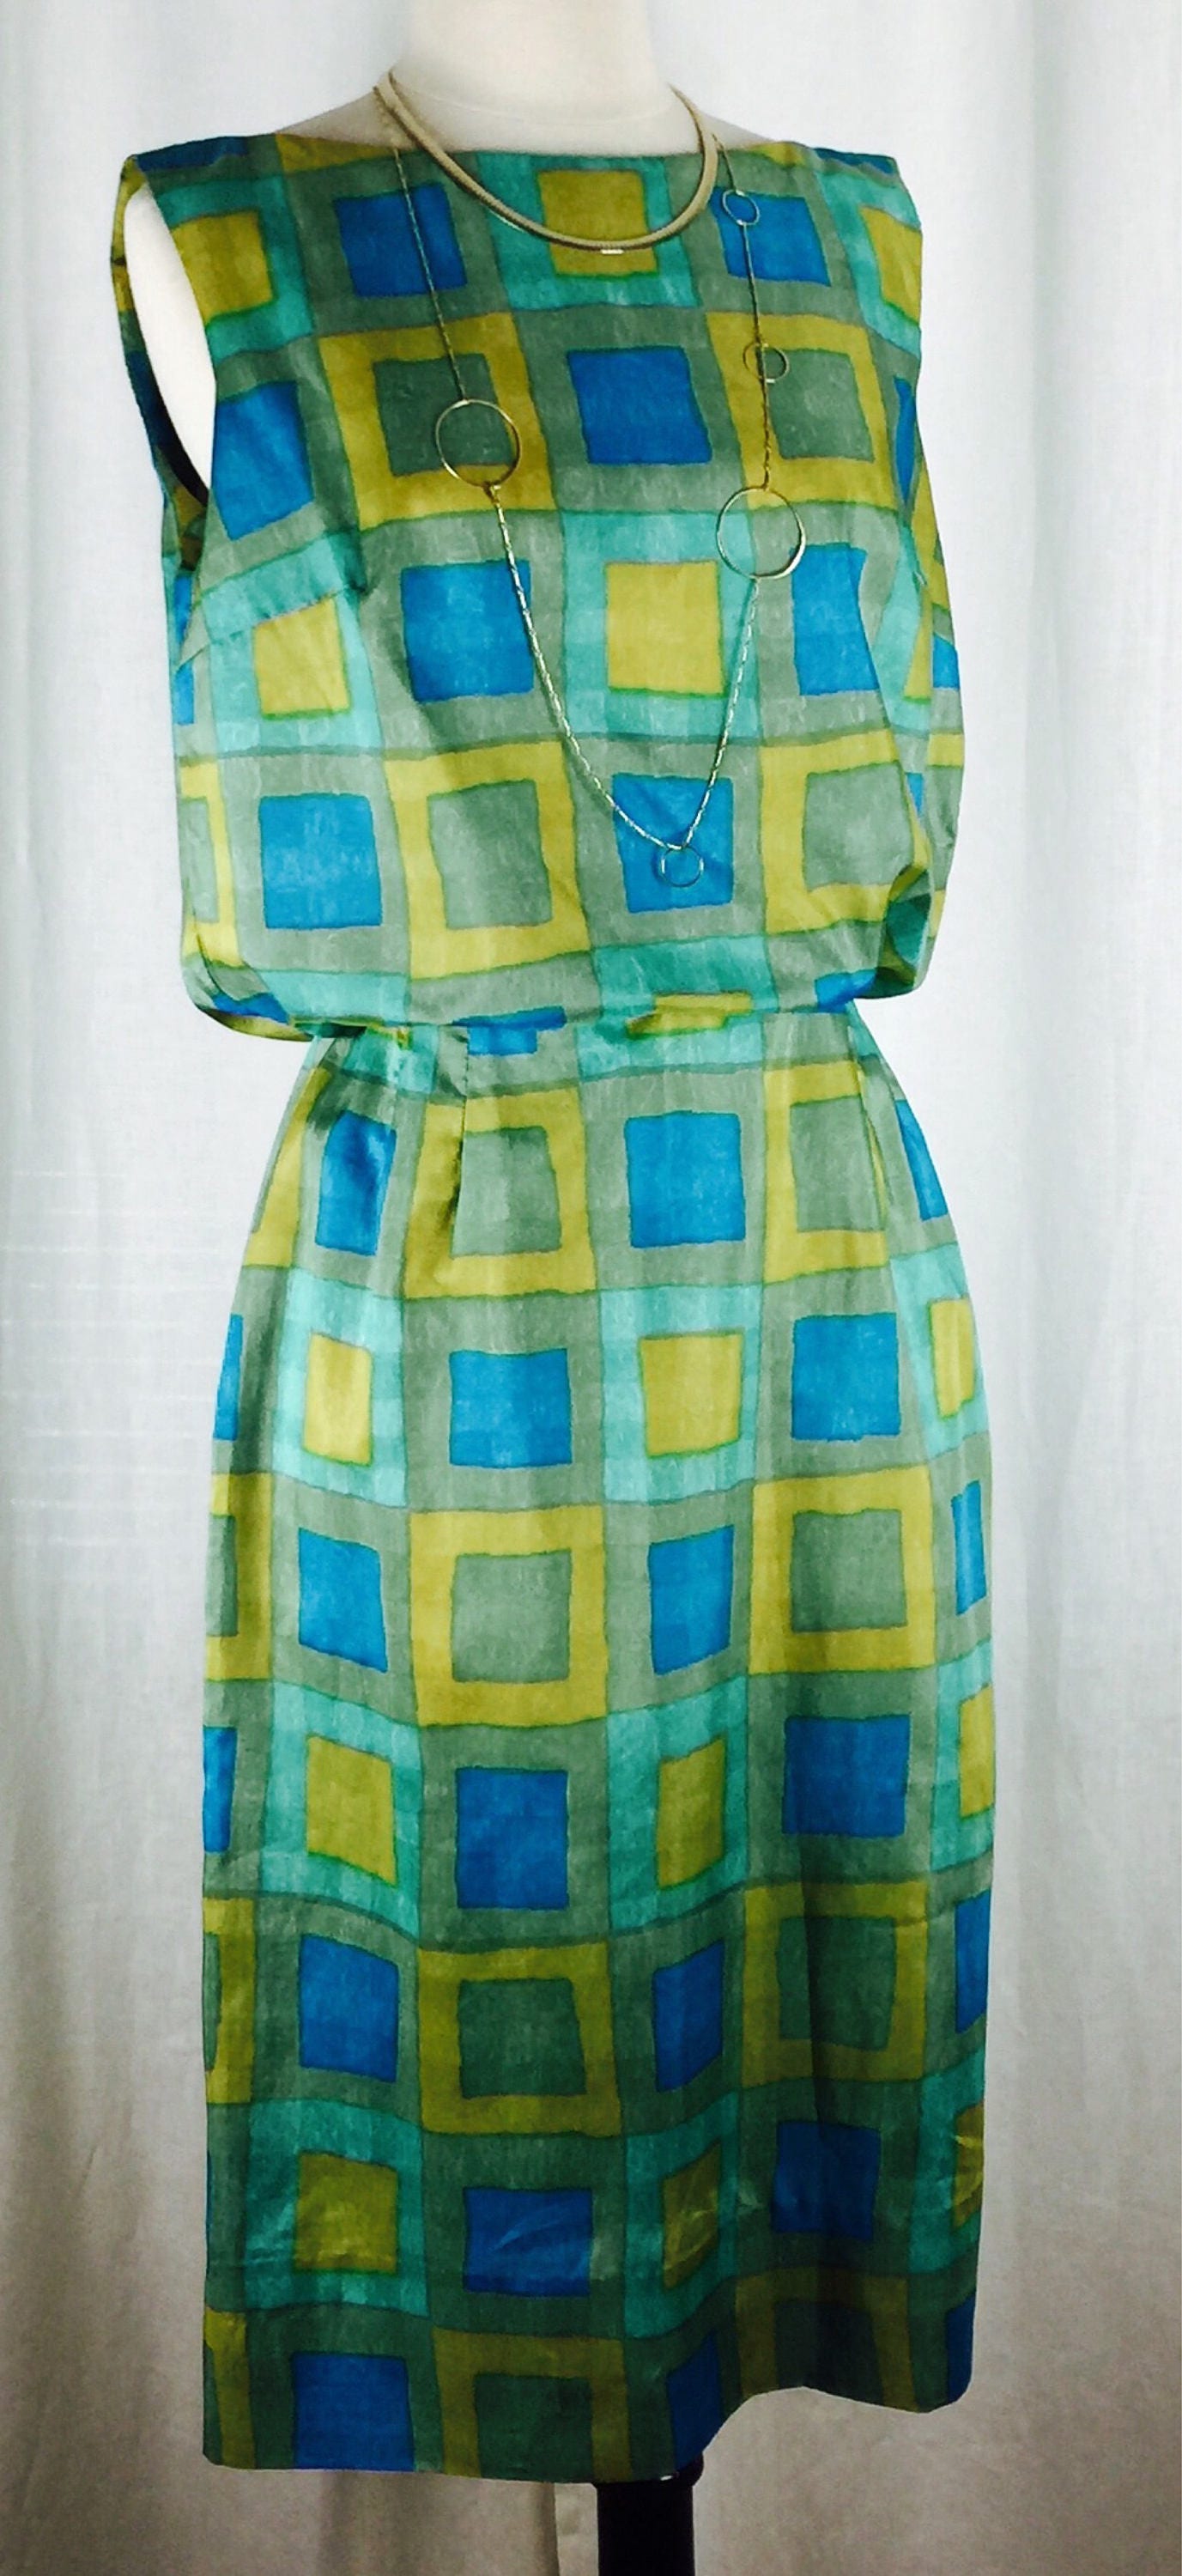 Vintage 60's Bright Mod Geometric Abstract Square Print - Etsy